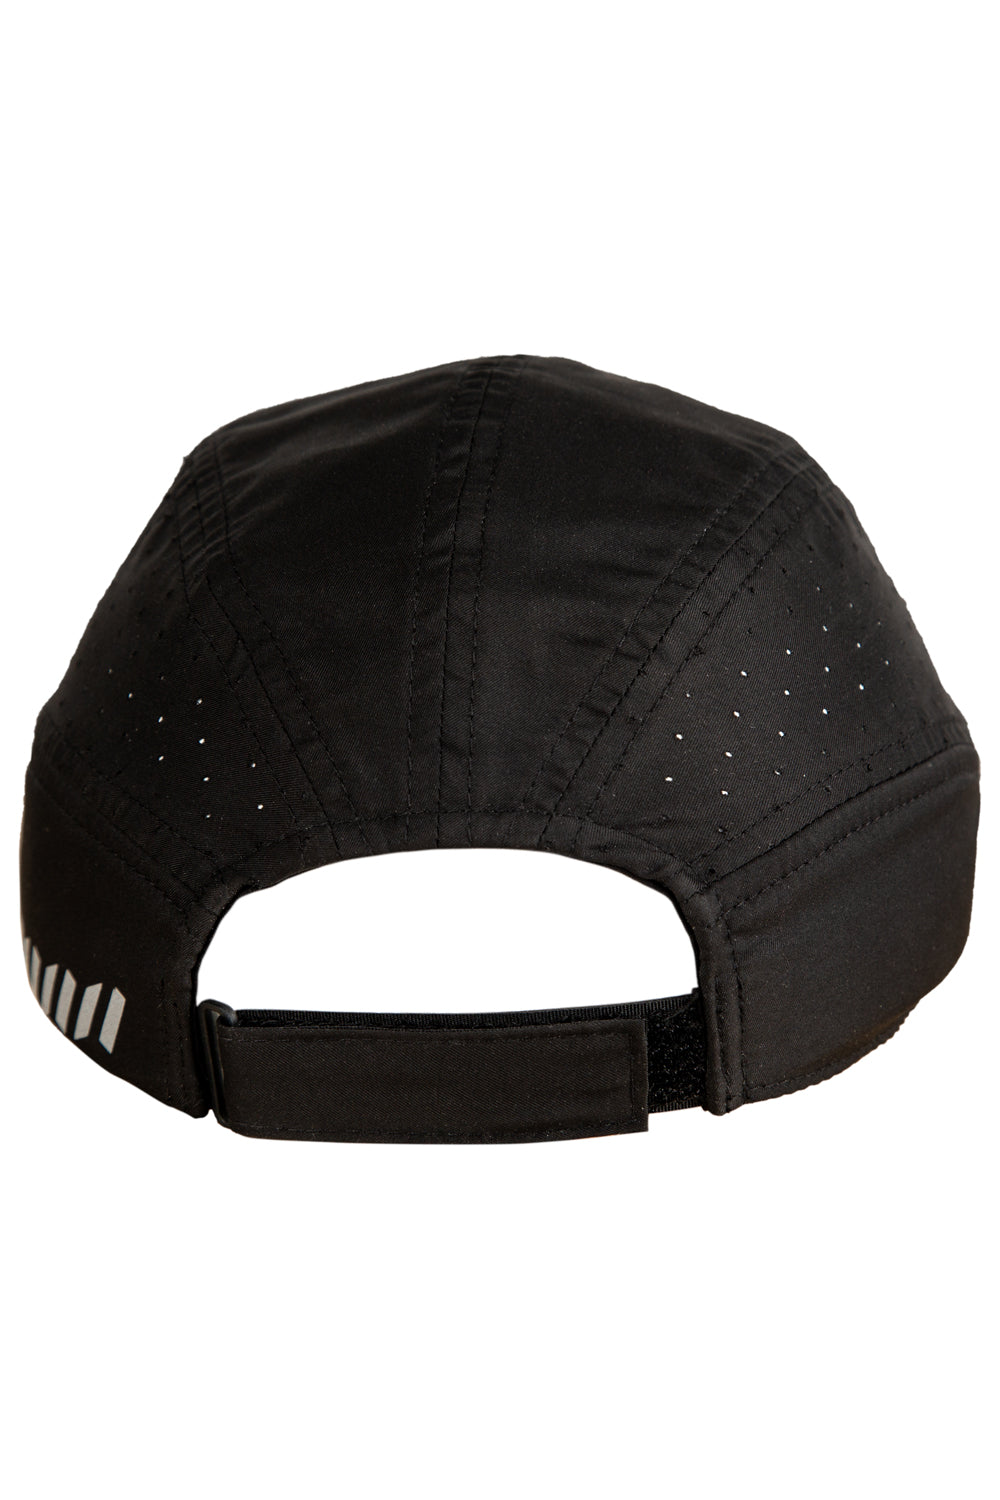 Sundried Running Cap Hats One Size Black SD0433 Black Activewear